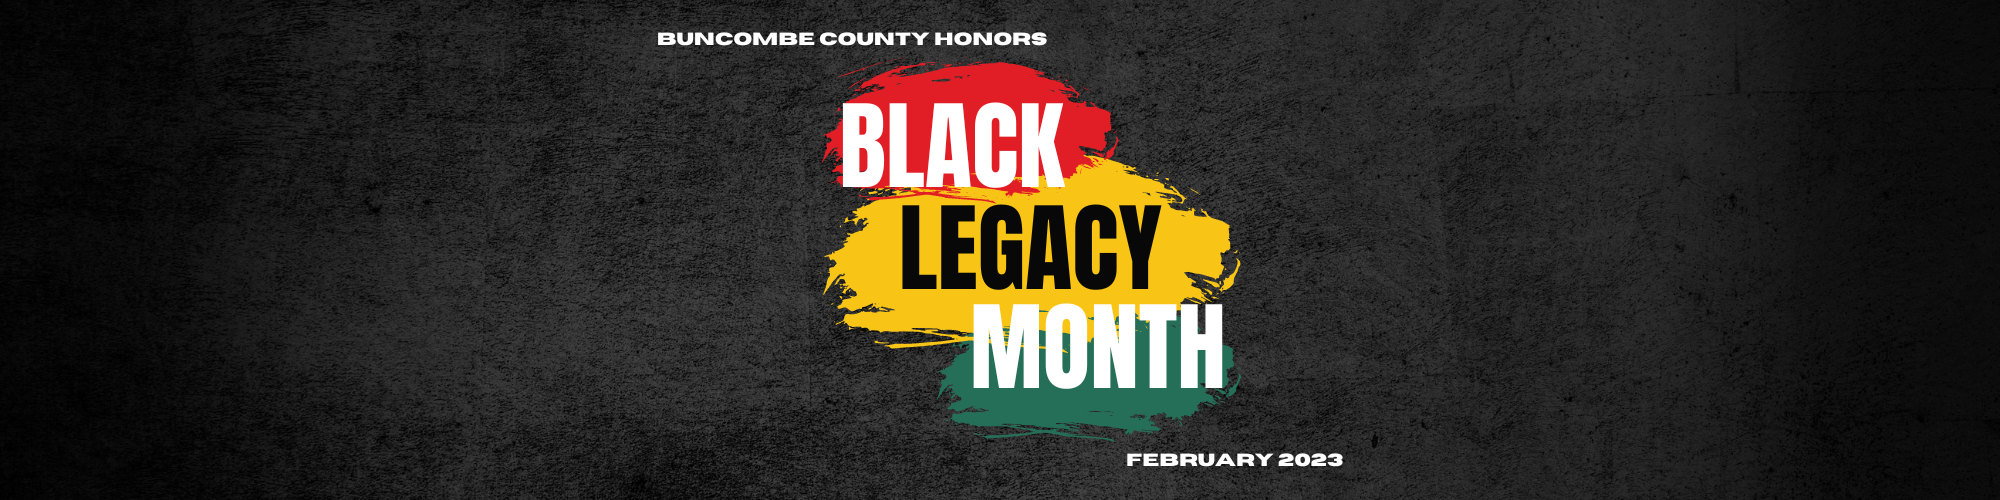 February is Black Legacy Month